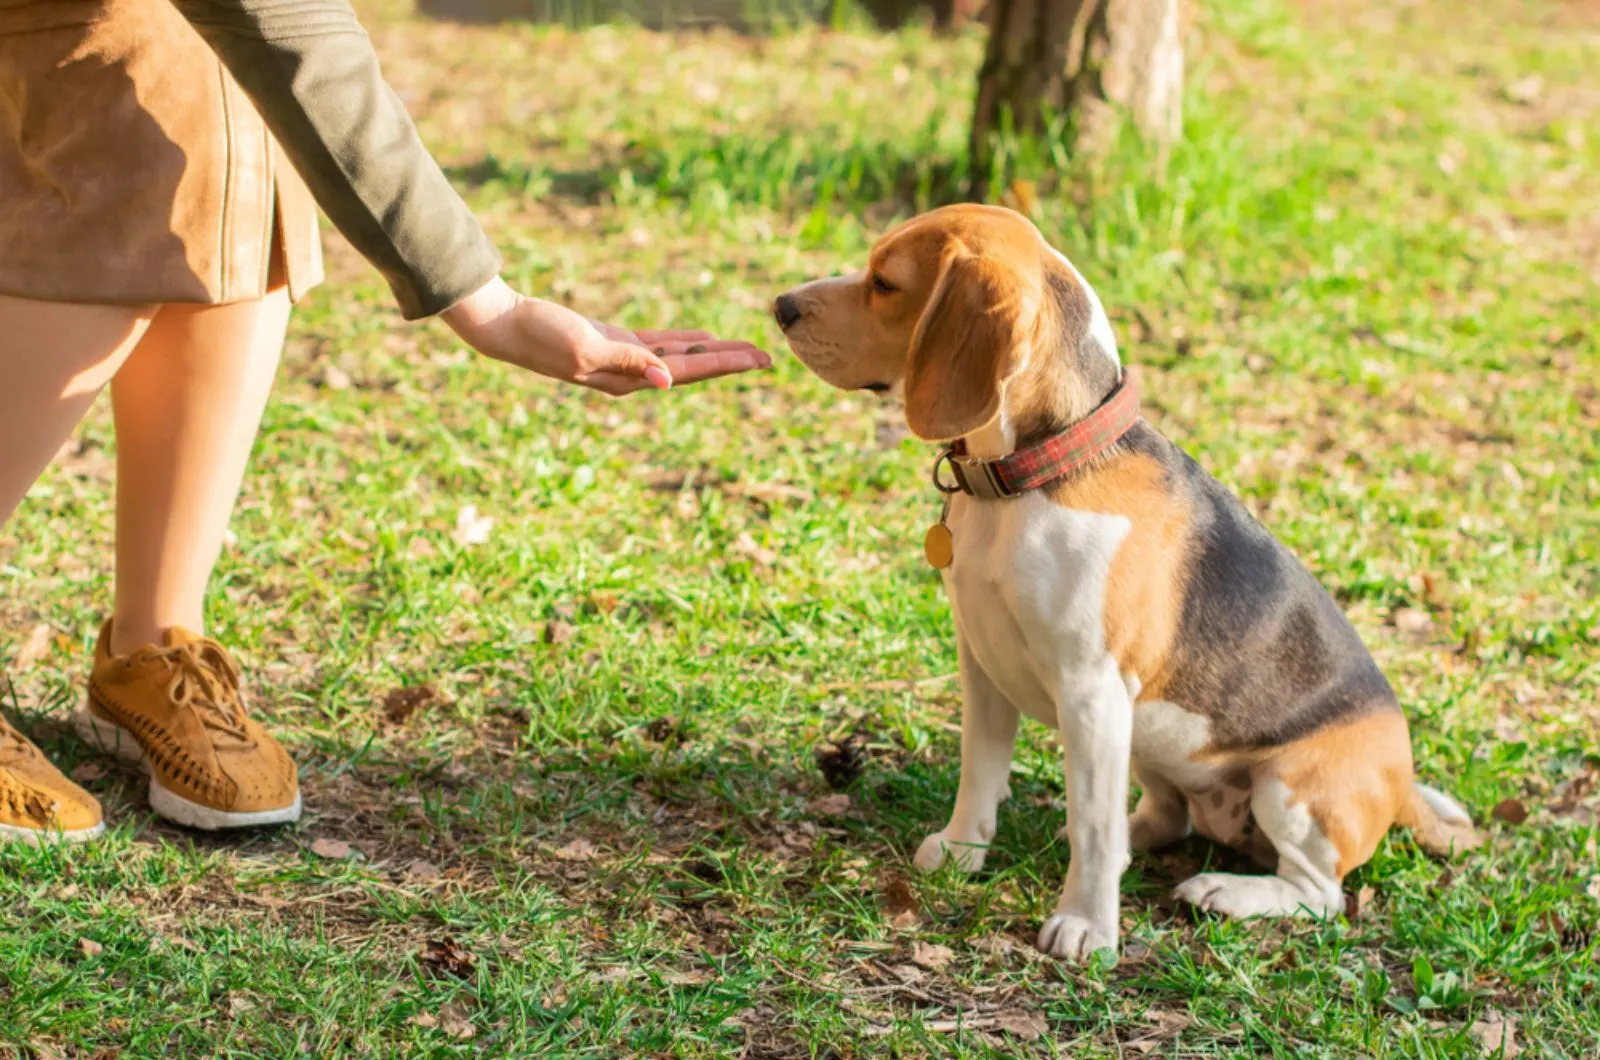 owner gives a treat to the beagle dog in the park